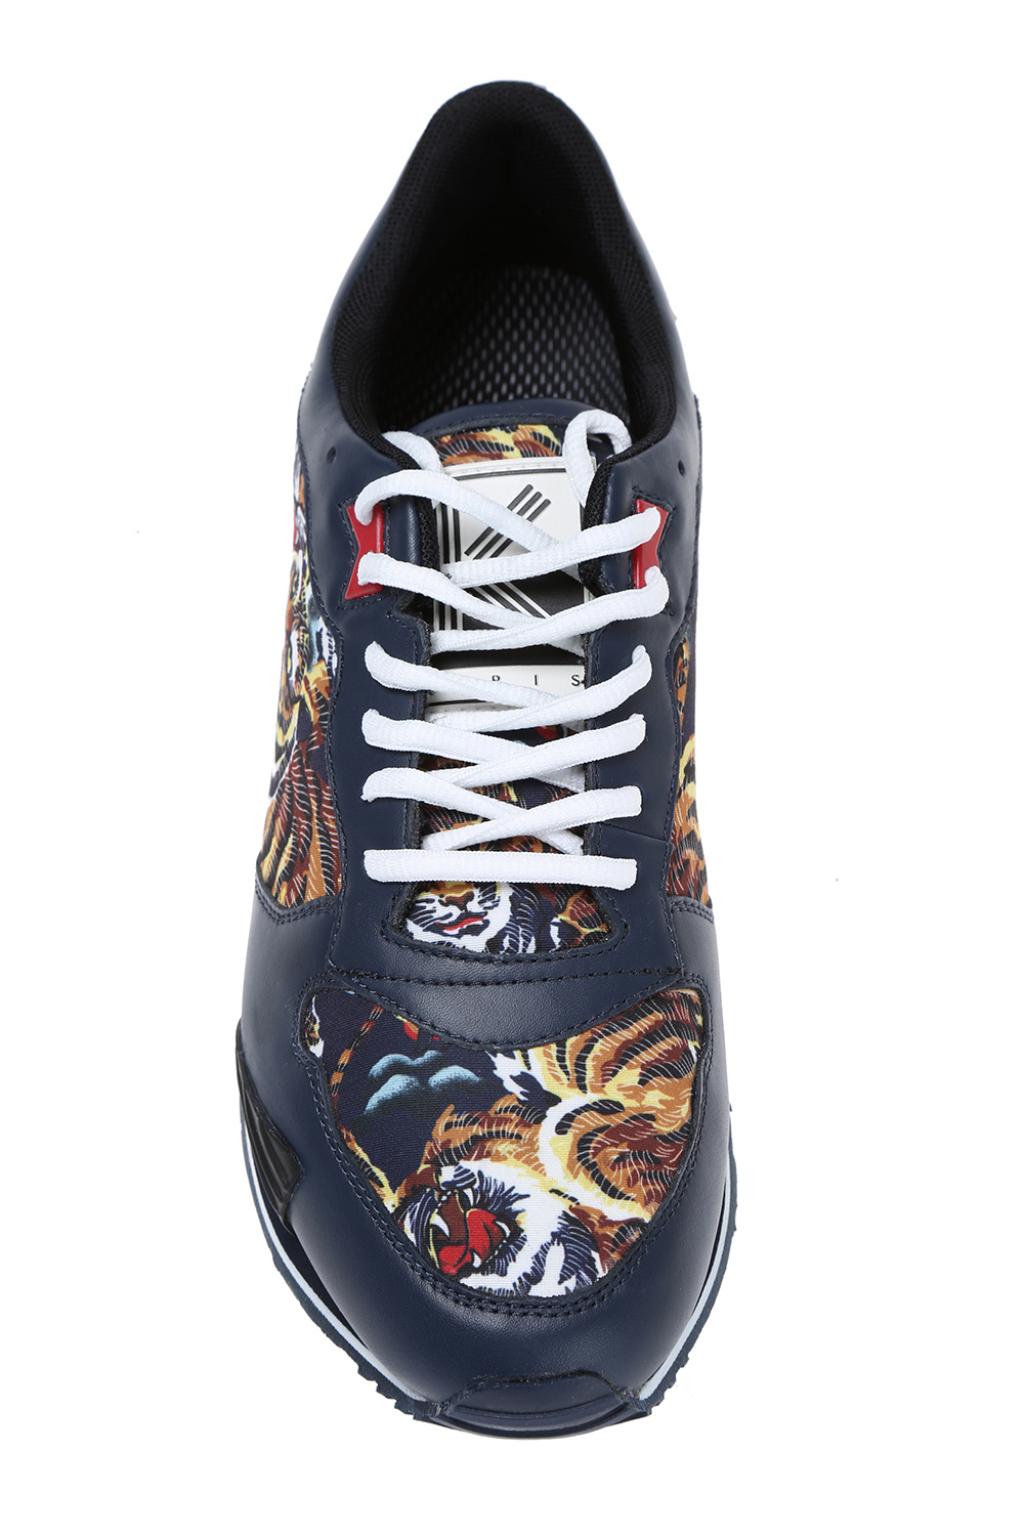 flying tiger shoes